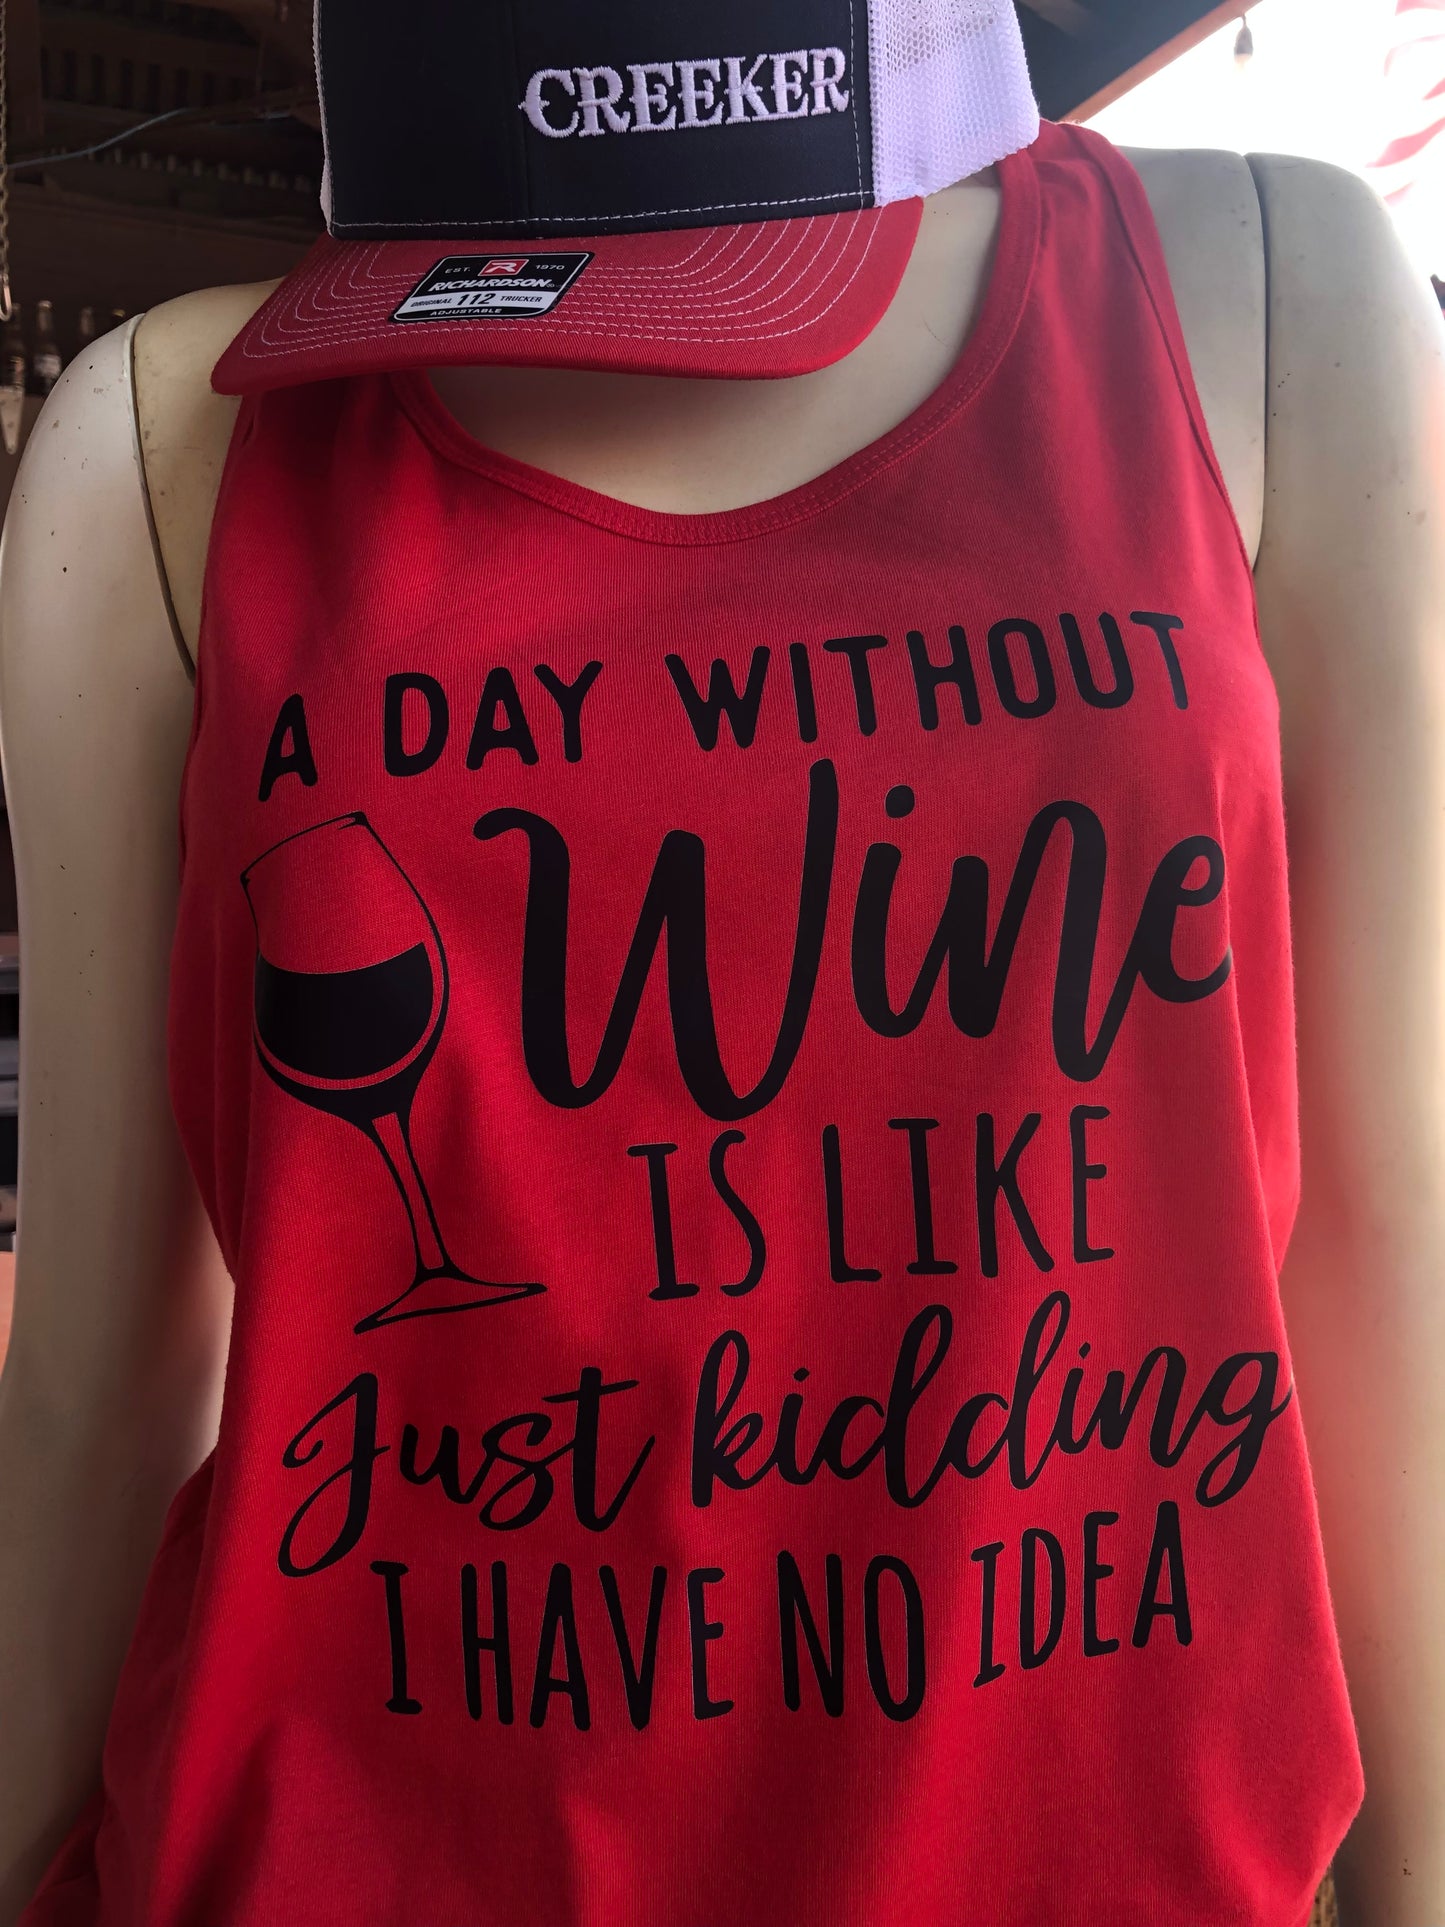 A Day Without Wine